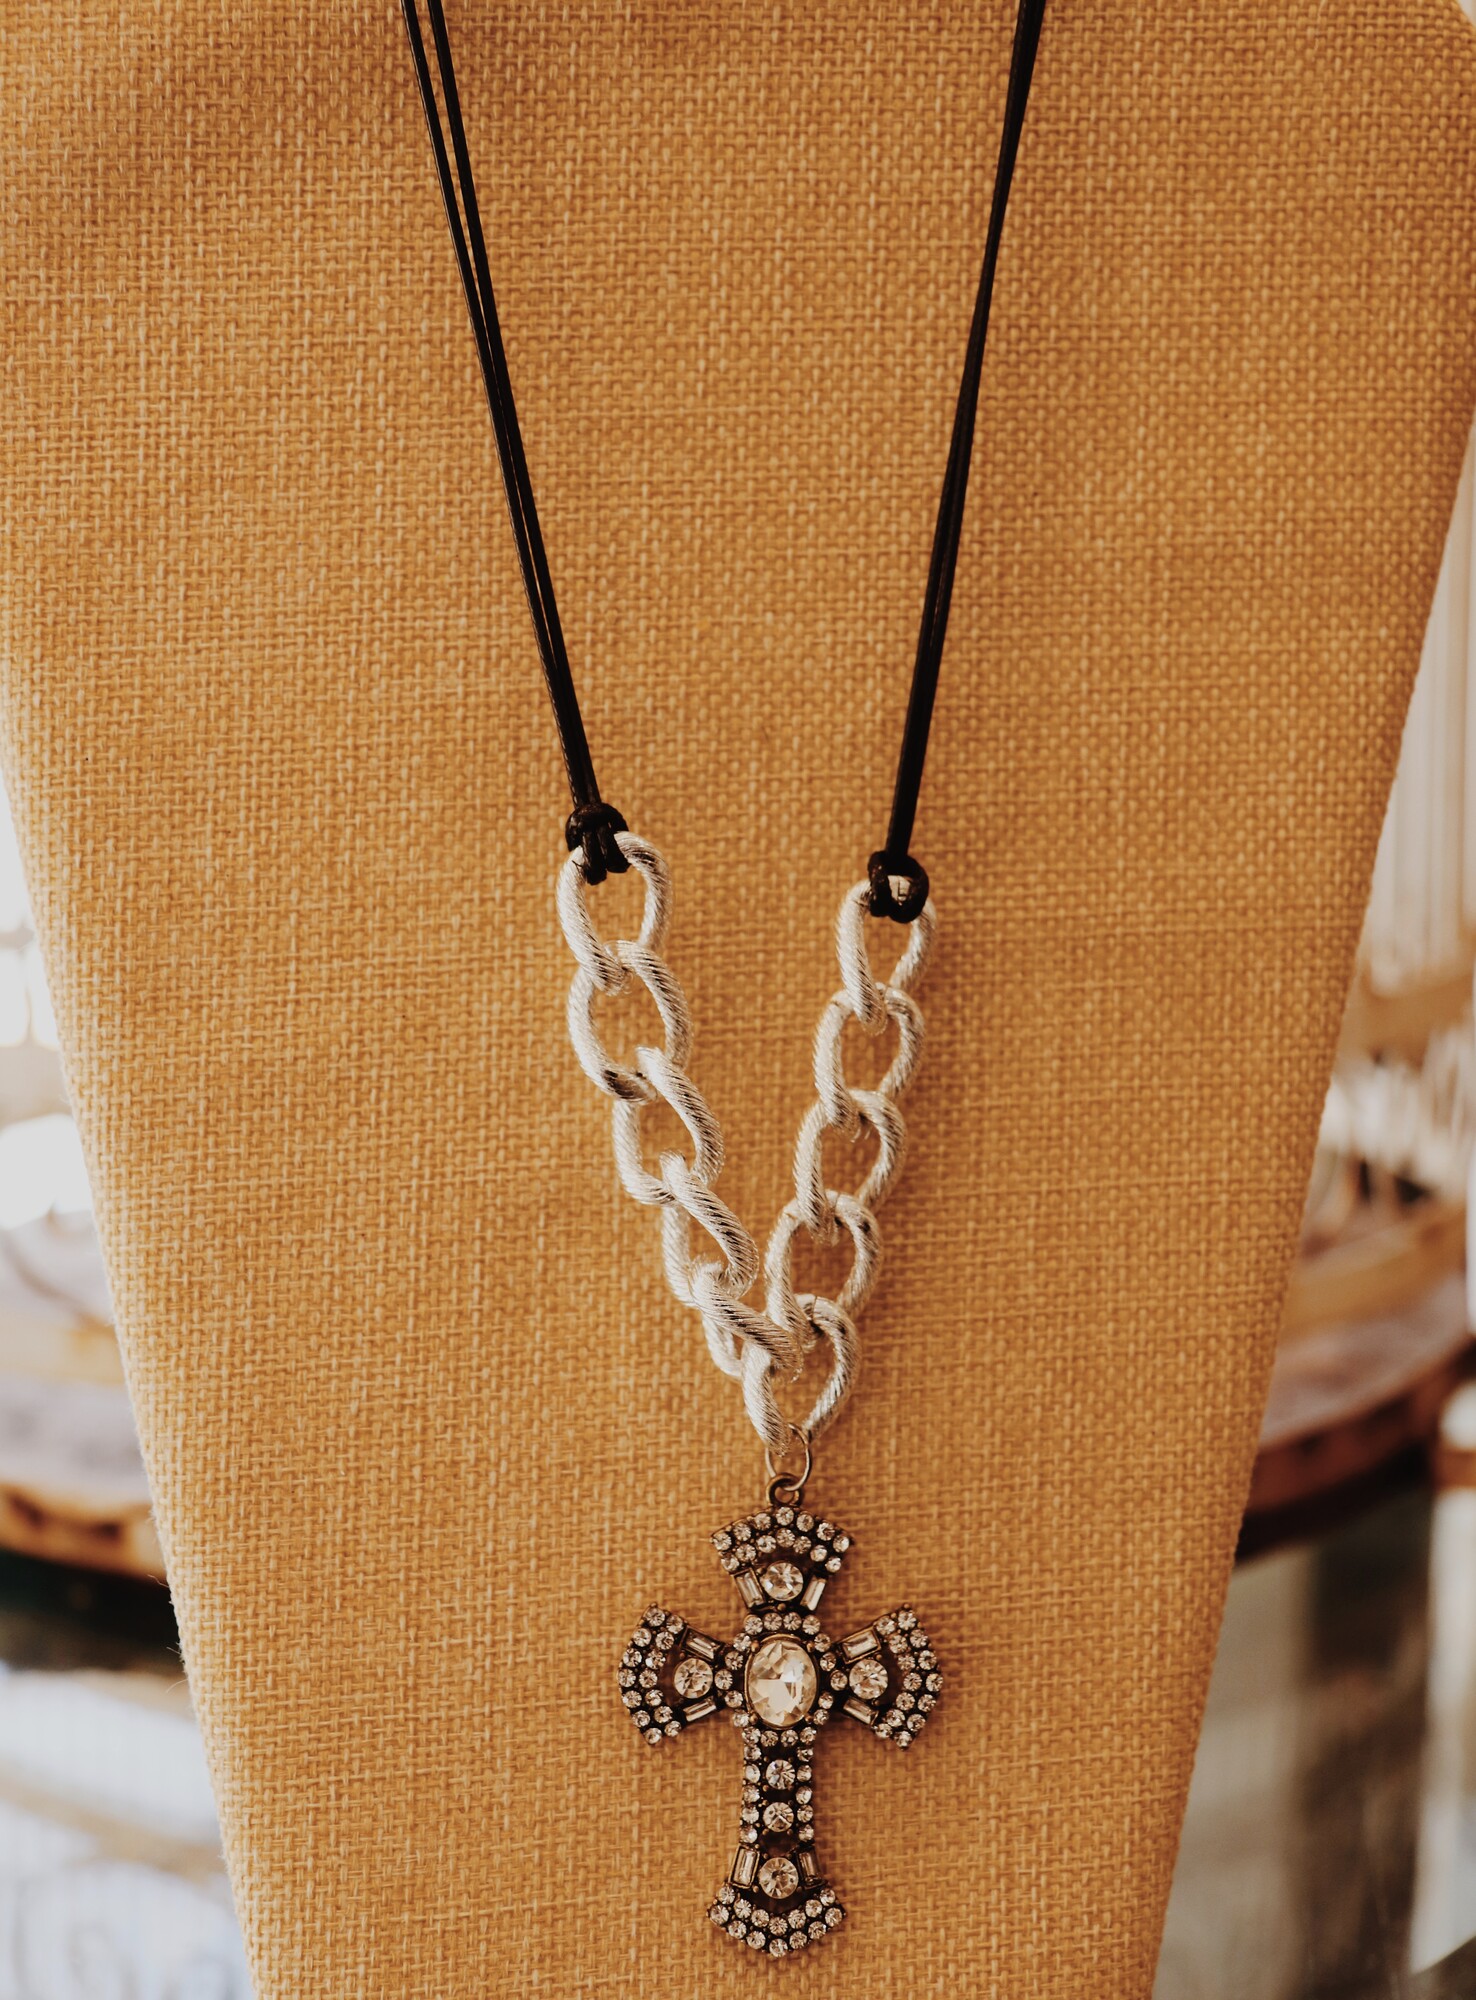 This necklace from Kelli Hawk Designs was handmade with love! It is on a 20 inch chain made of black cording and chunky silver chain and has a rhinestoned cross pendant.